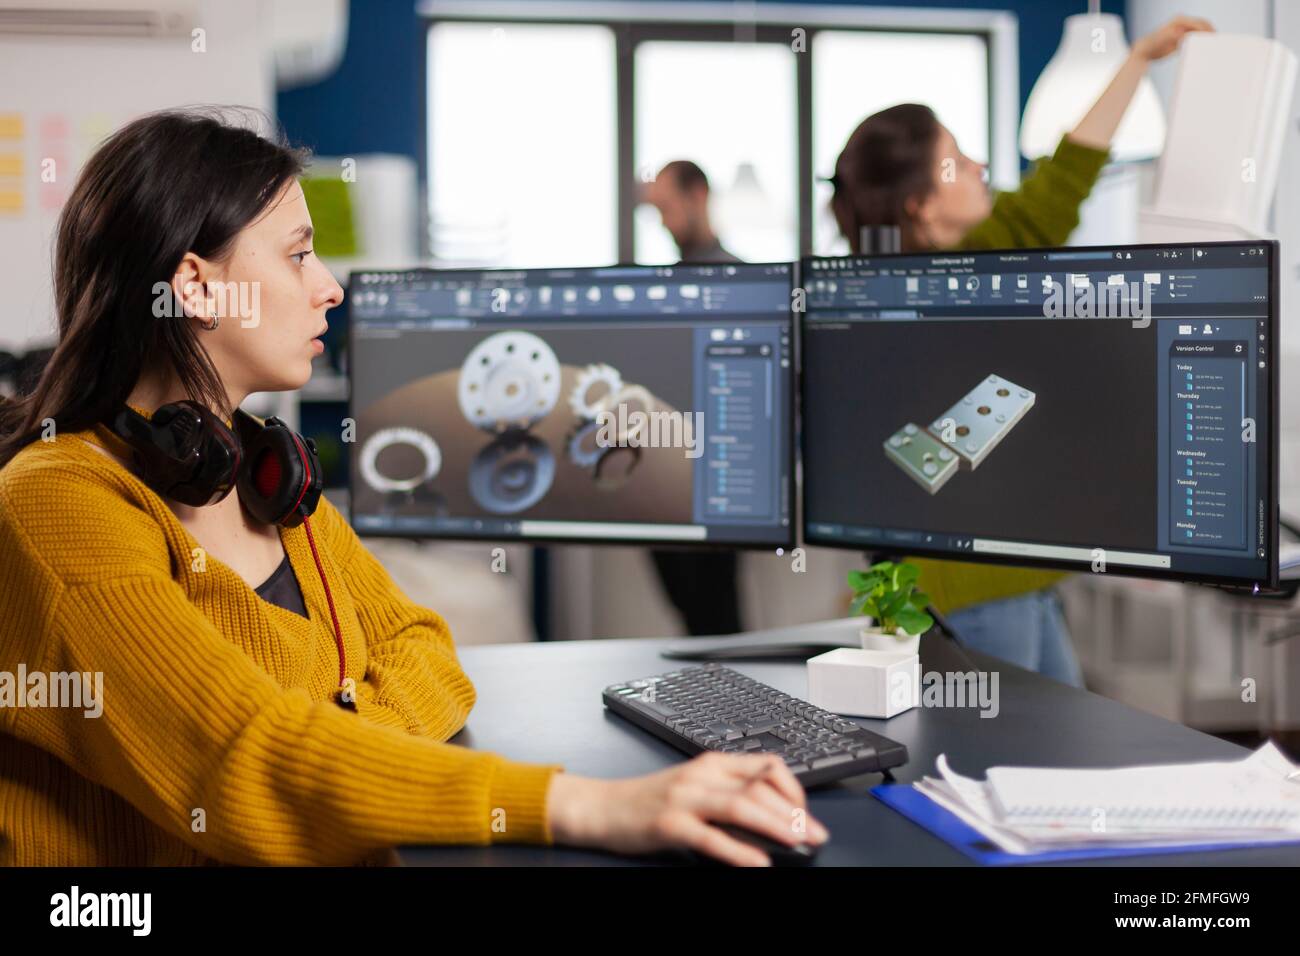 Industrial female engineer looking at personal computer with dual monitors setup, screens showing CAD software with 3D prototype of gears metalic mechanical piece. Employee working in creative office Stock Photo